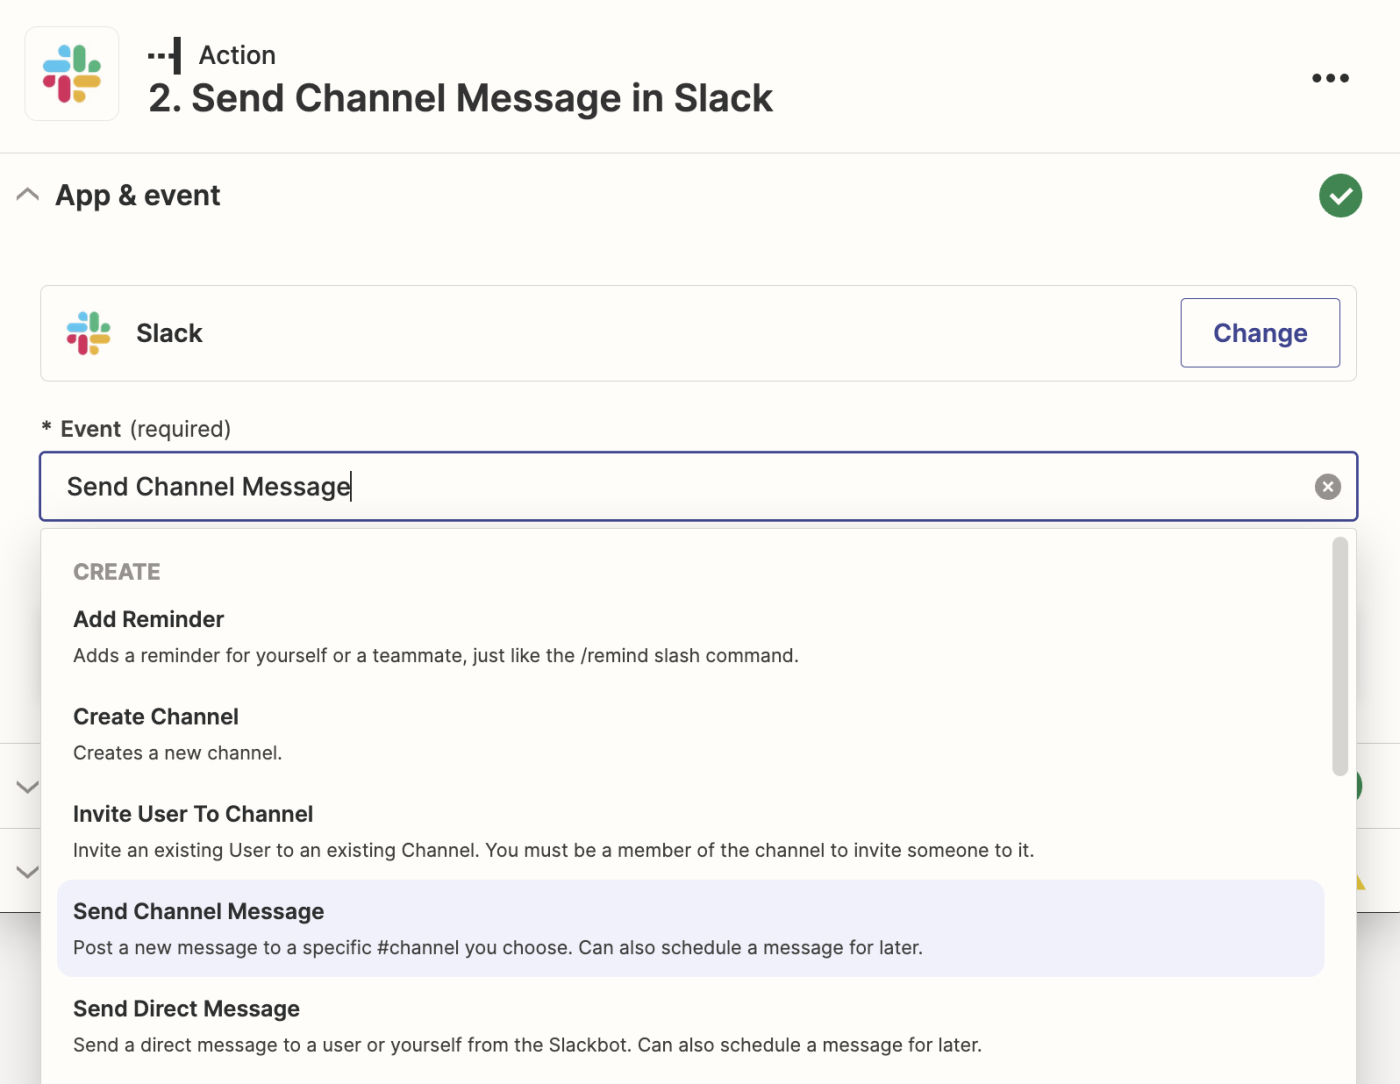 Send Channel Message has been selected in the Event field in a Slack action step in the Zap editor.